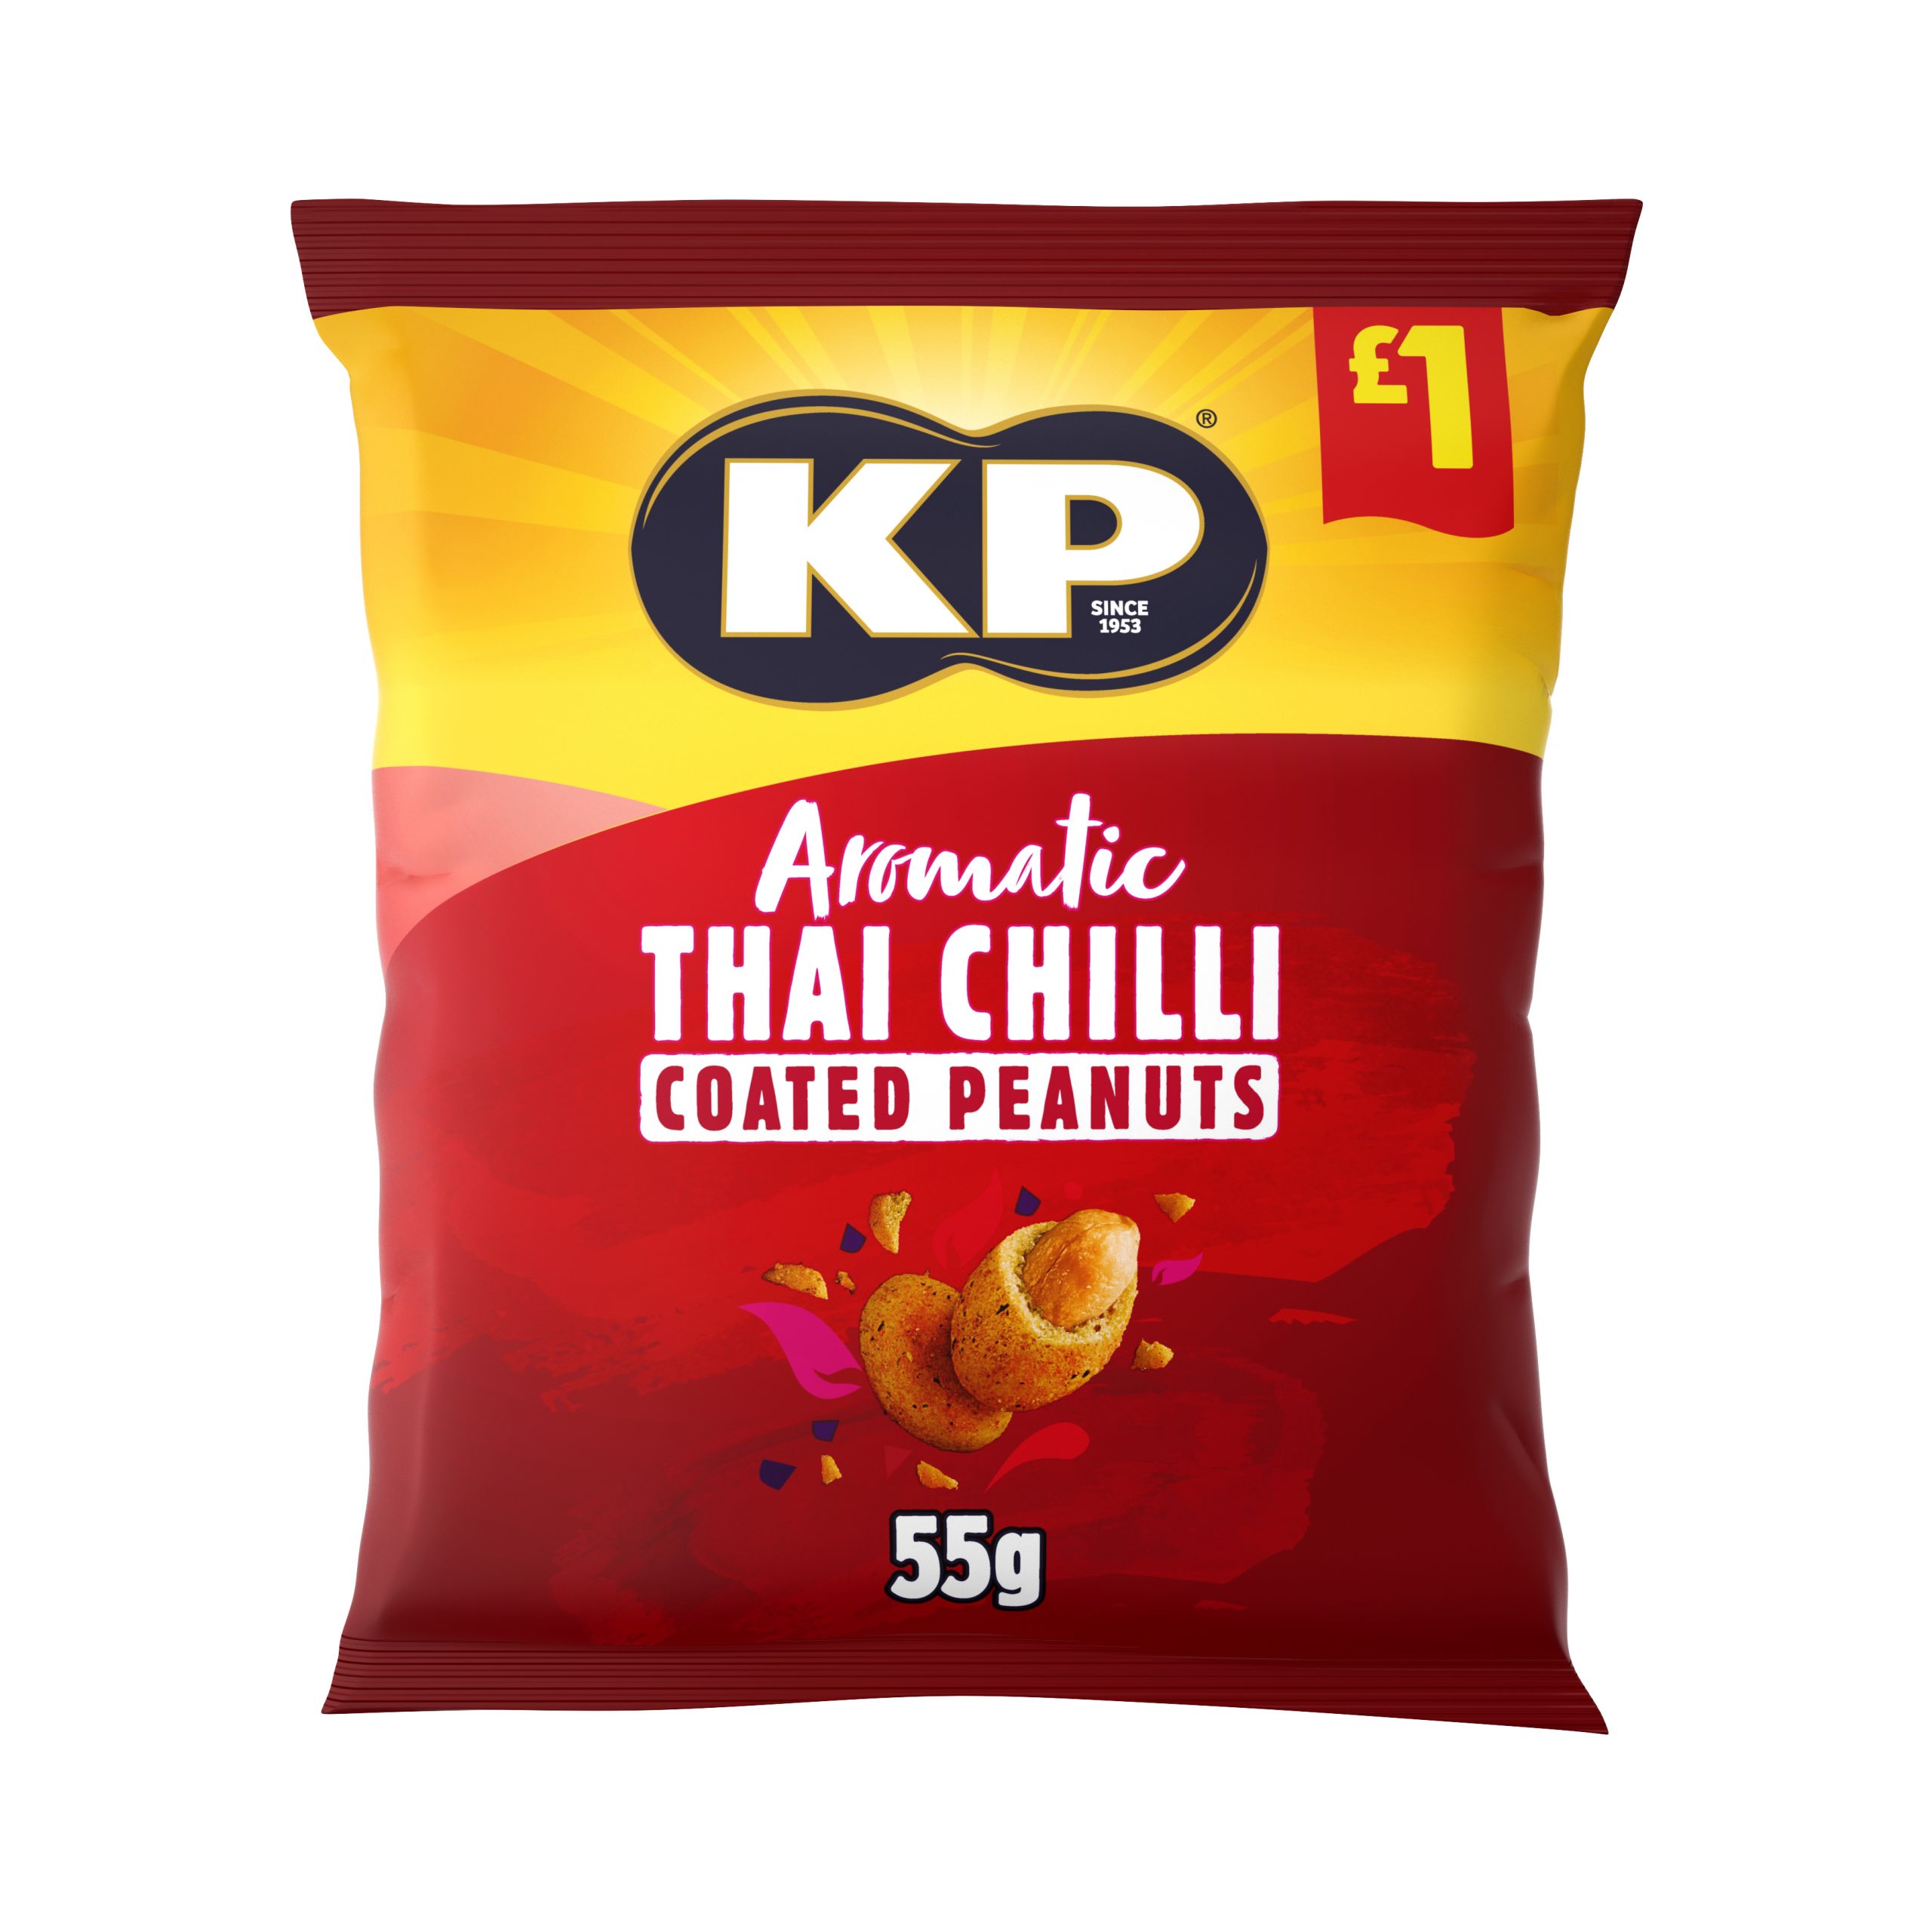 KP Snacks launches new aromatic Thai Chilli Coated Peanuts